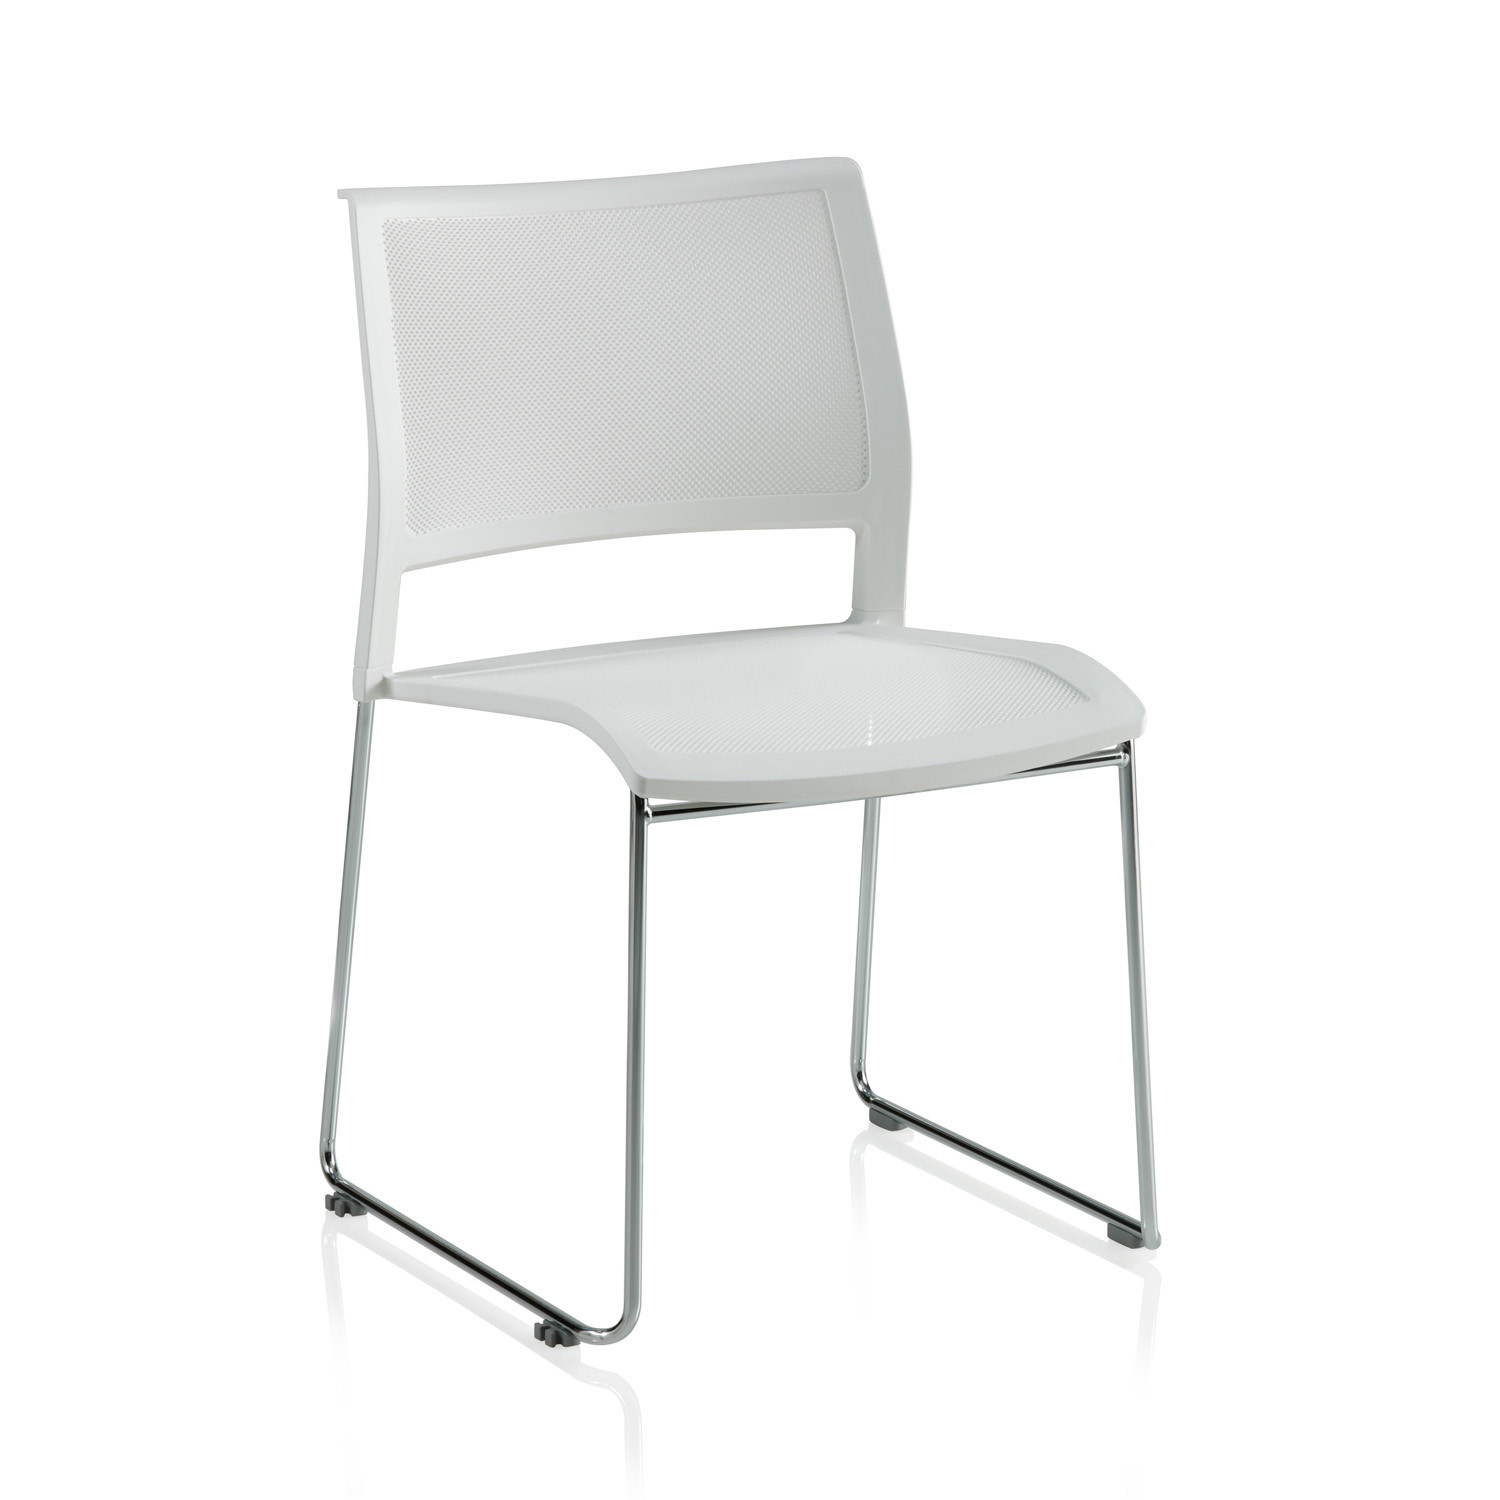 Opt4 Visitor Chair by KI